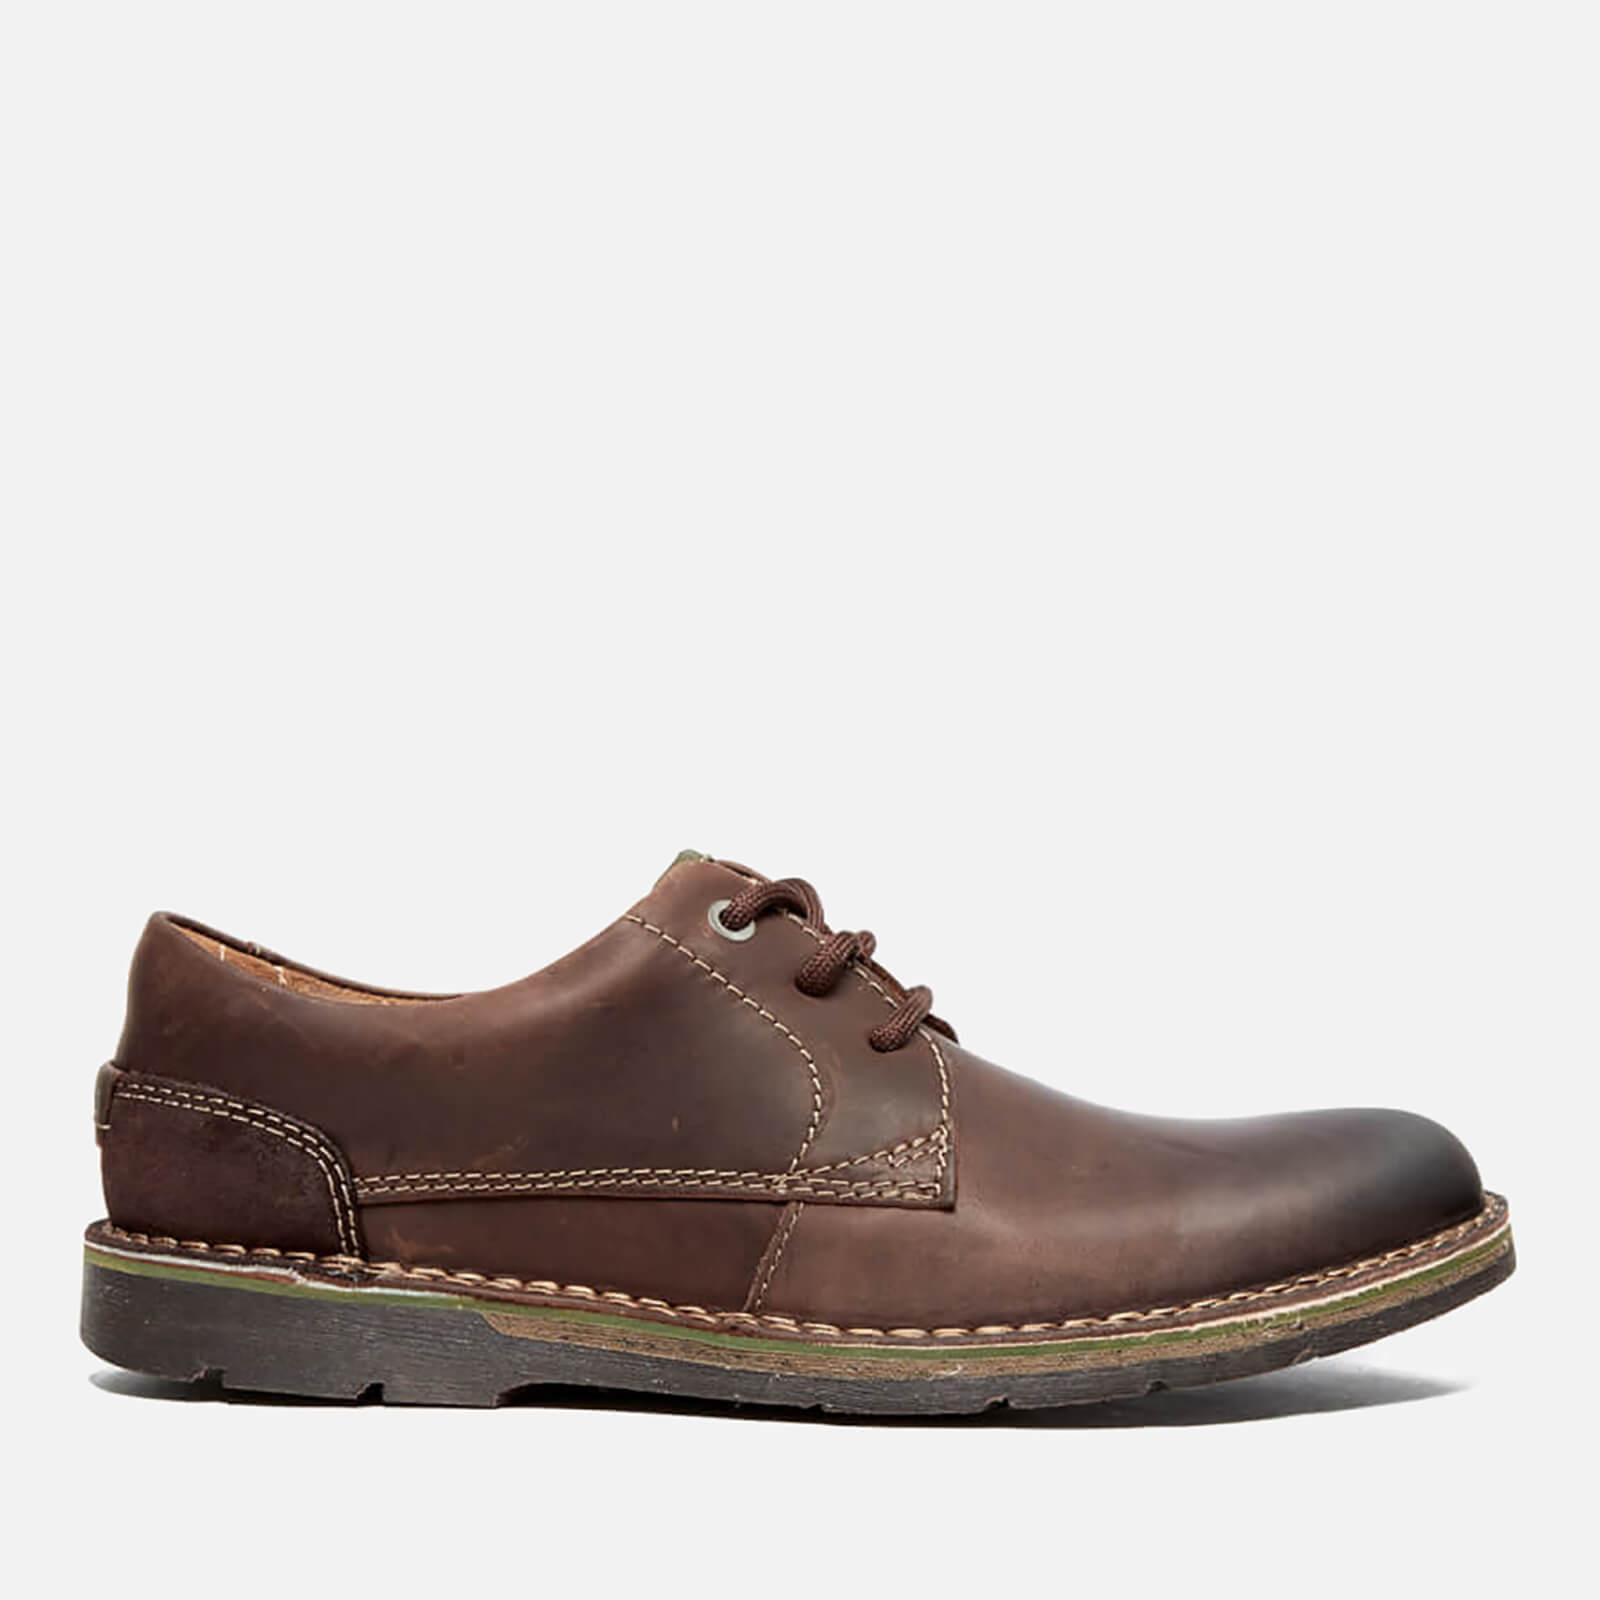 Clarks Edgewick Plain Leather Shoes in 